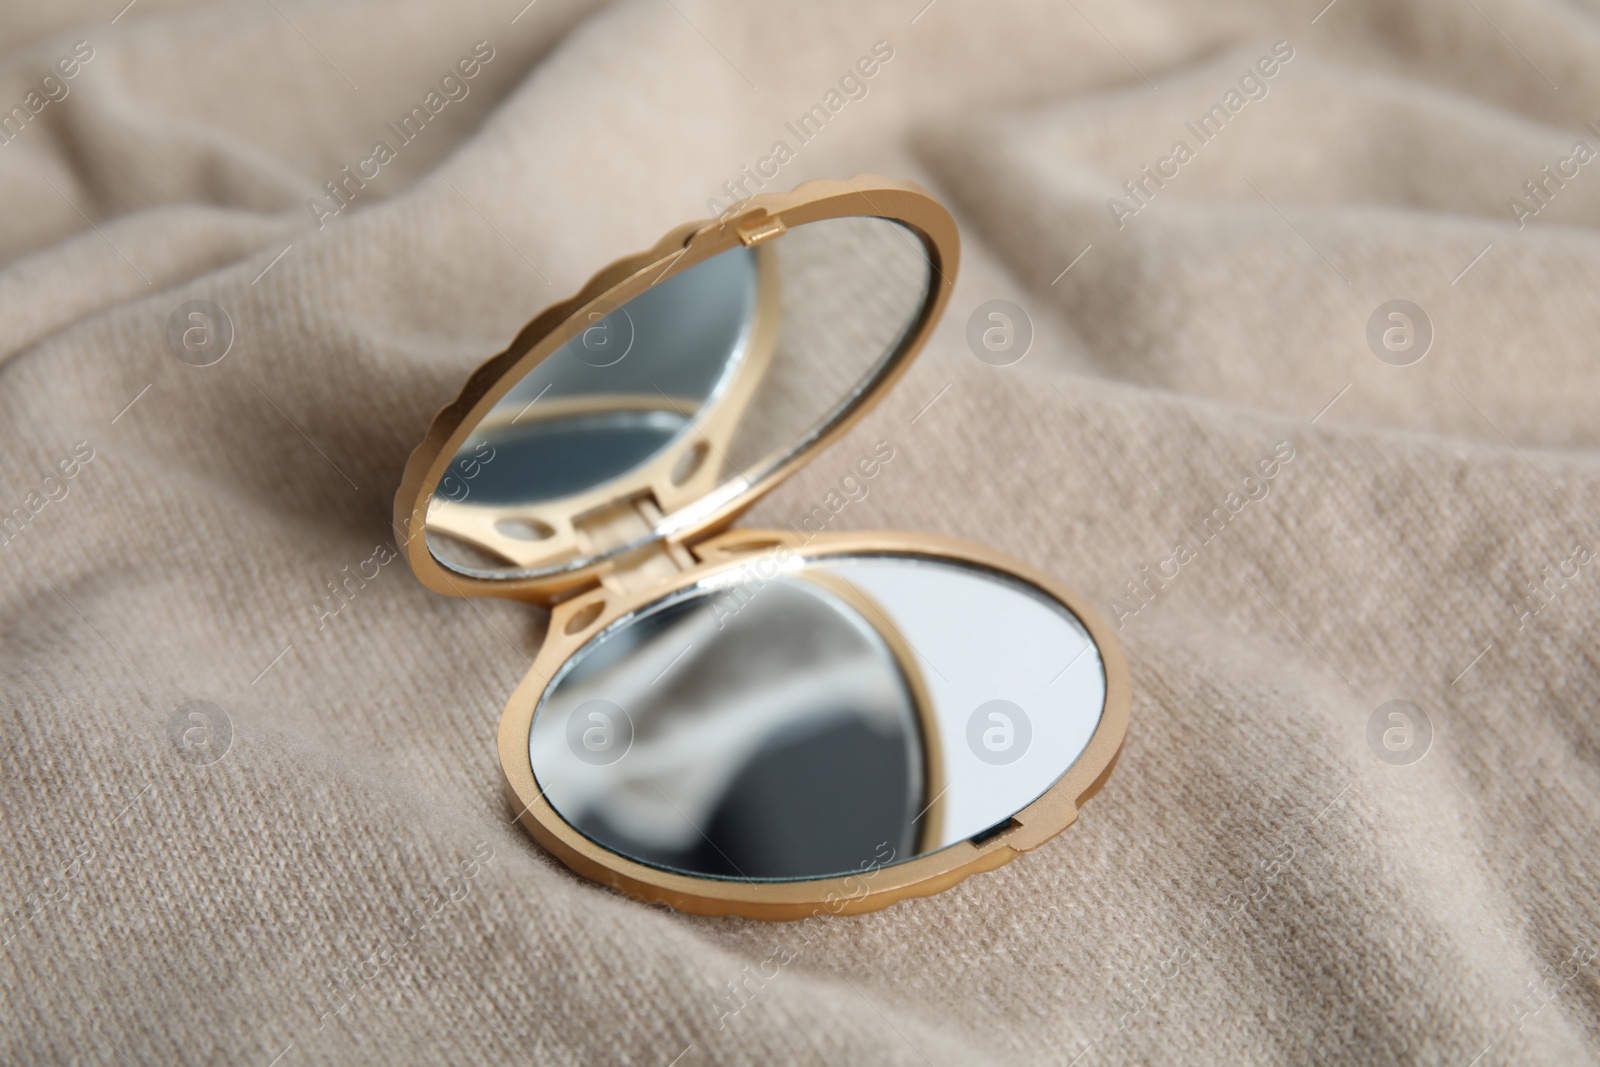 Photo of Stylish cosmetic pocket mirror on brown fabric